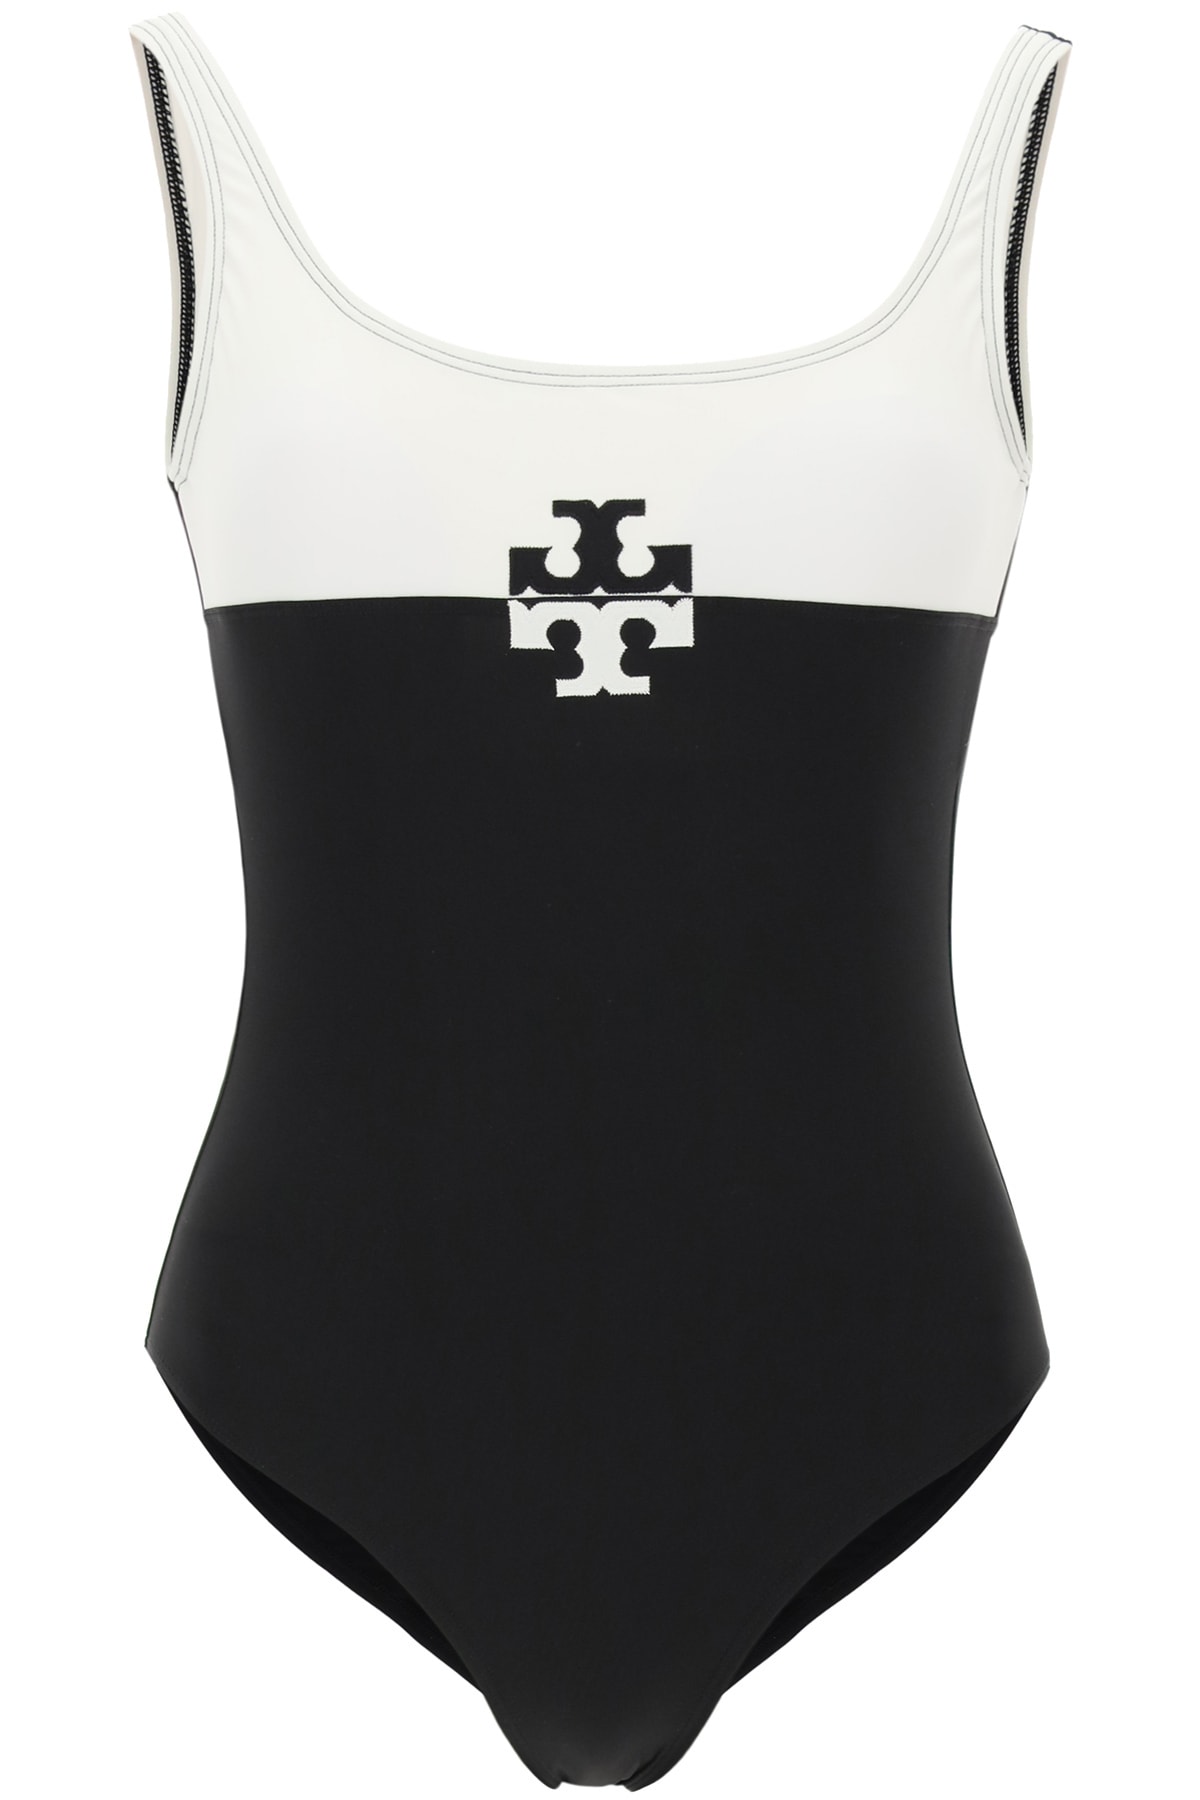 Tory Burch Two-tone Swimsuit With Monogram